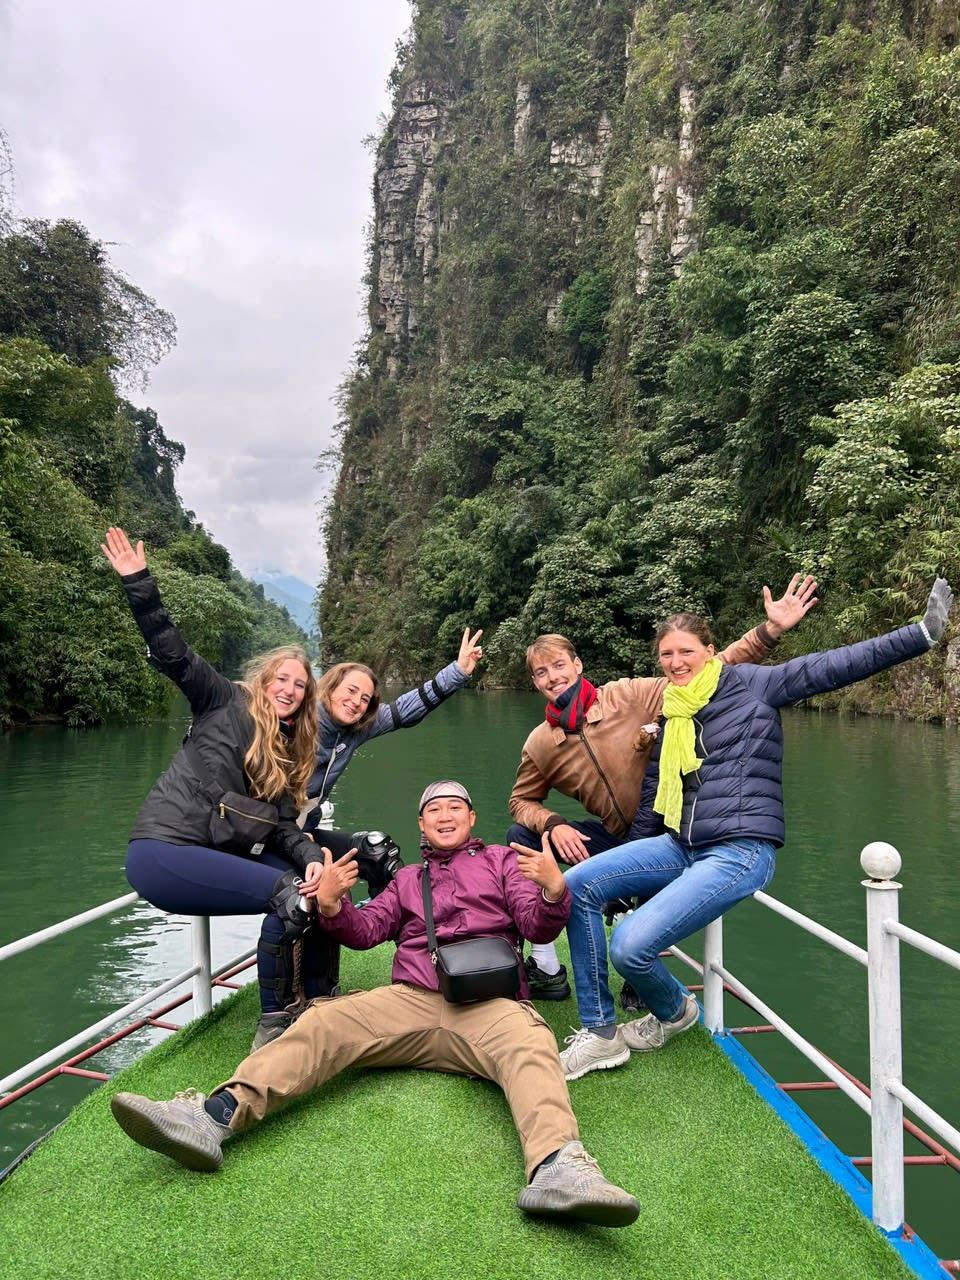 Boat Trip on Mien River with Cheers Hostel